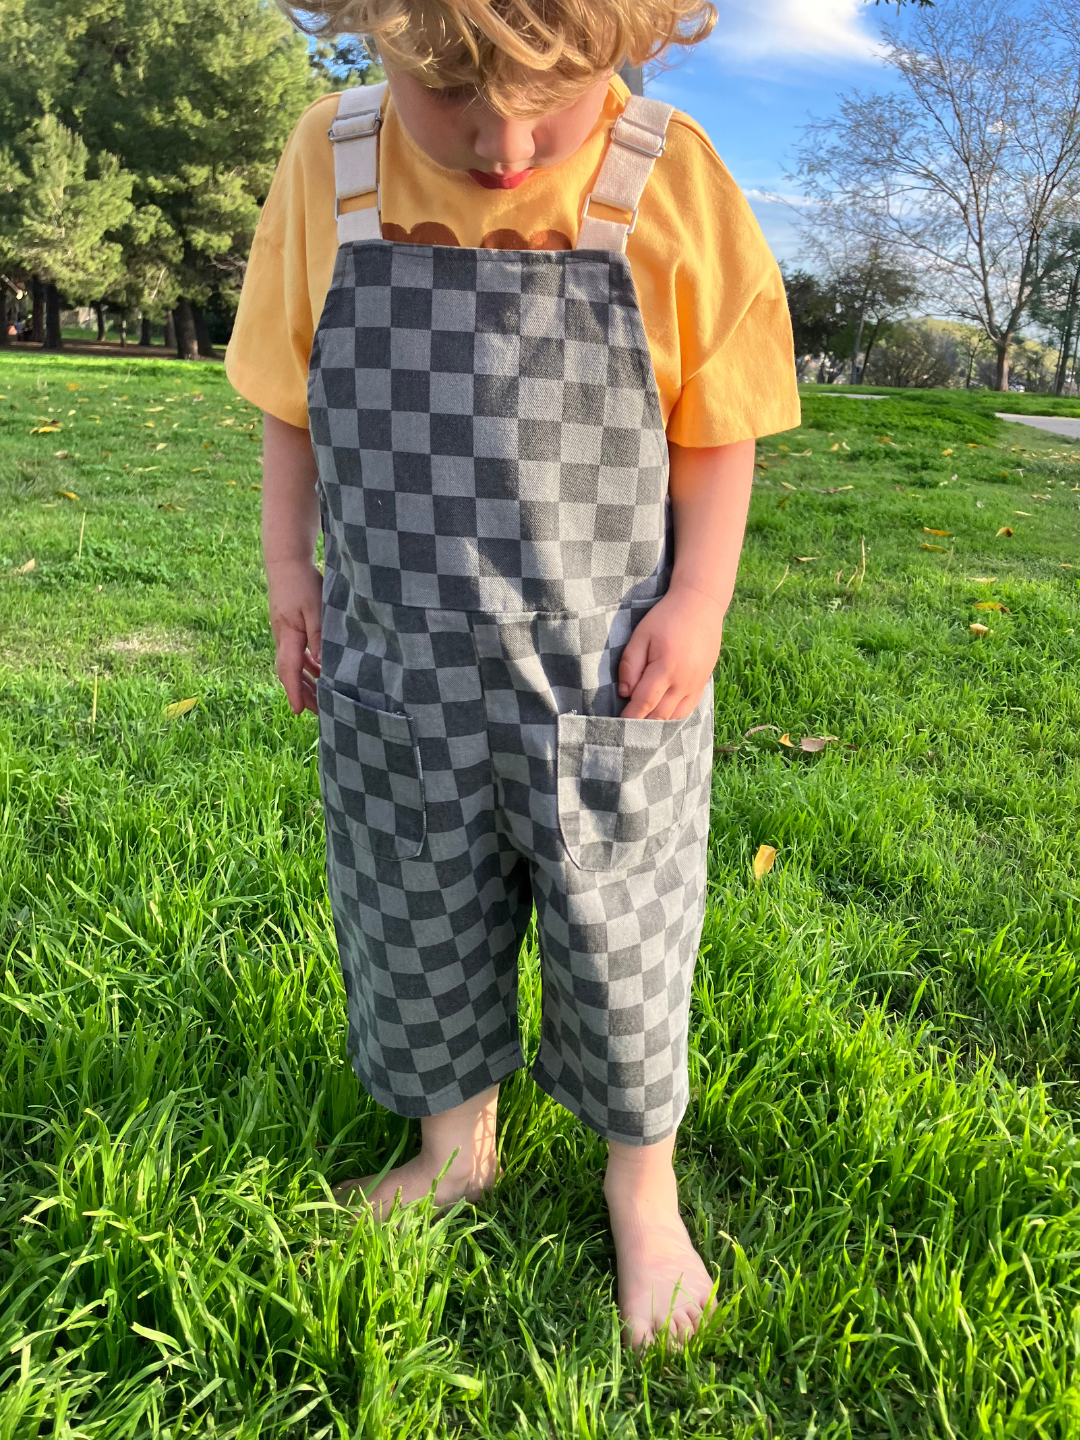 Charcoal | A child is wearing checker overalls in charcoal over a yellow tee